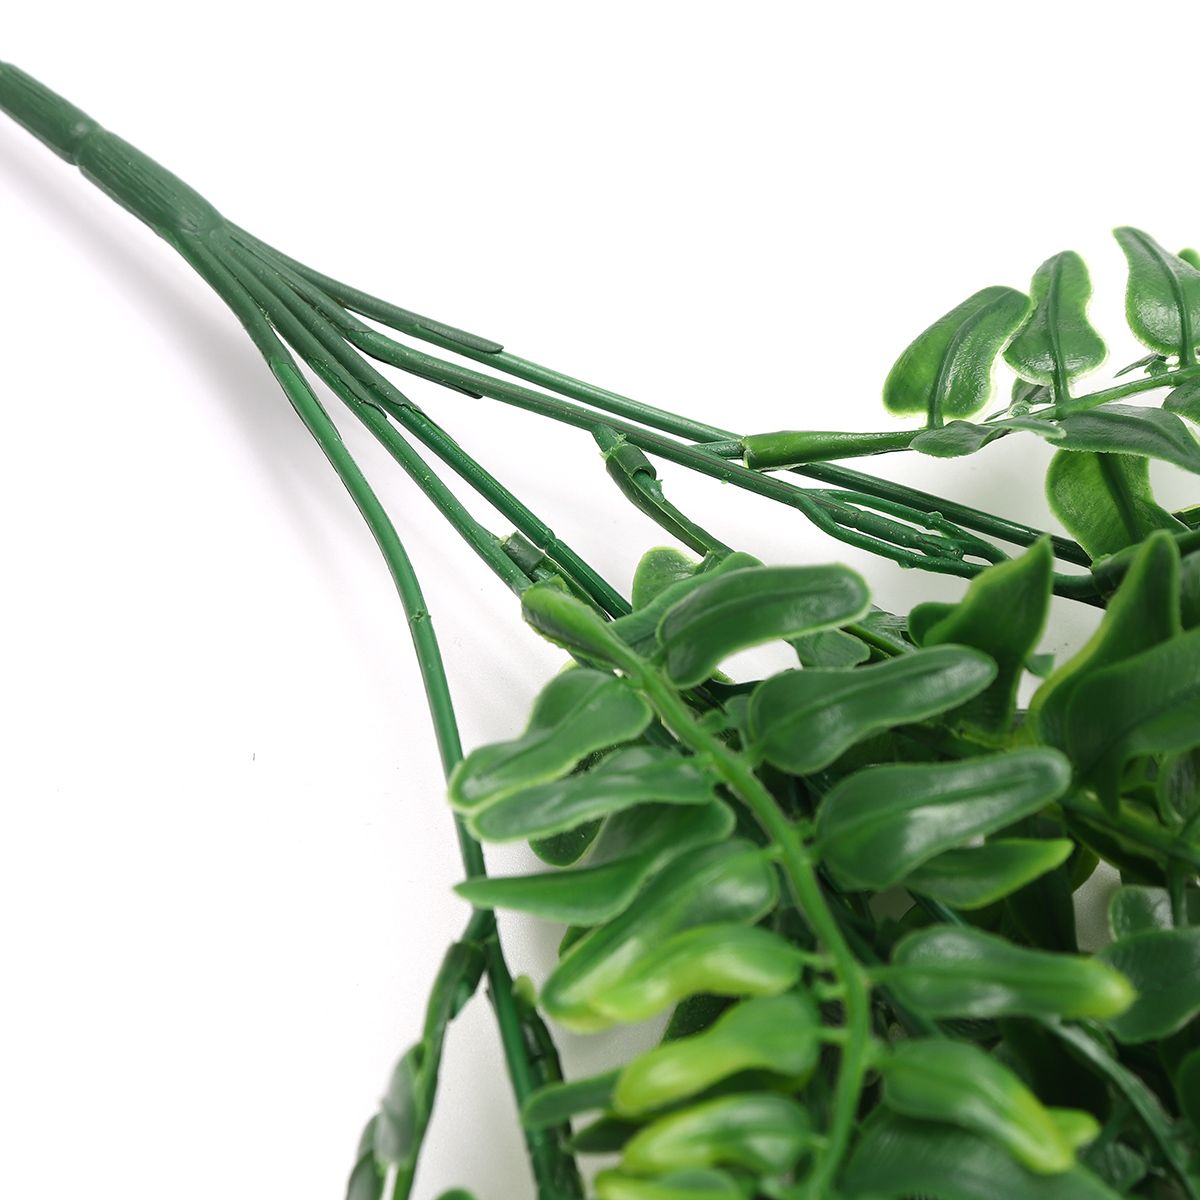 22cm-Artificial-Hanging-Vines-Plants-Ivy-Greenery-Faux-Plants-Wall-Home-Decor-1685538